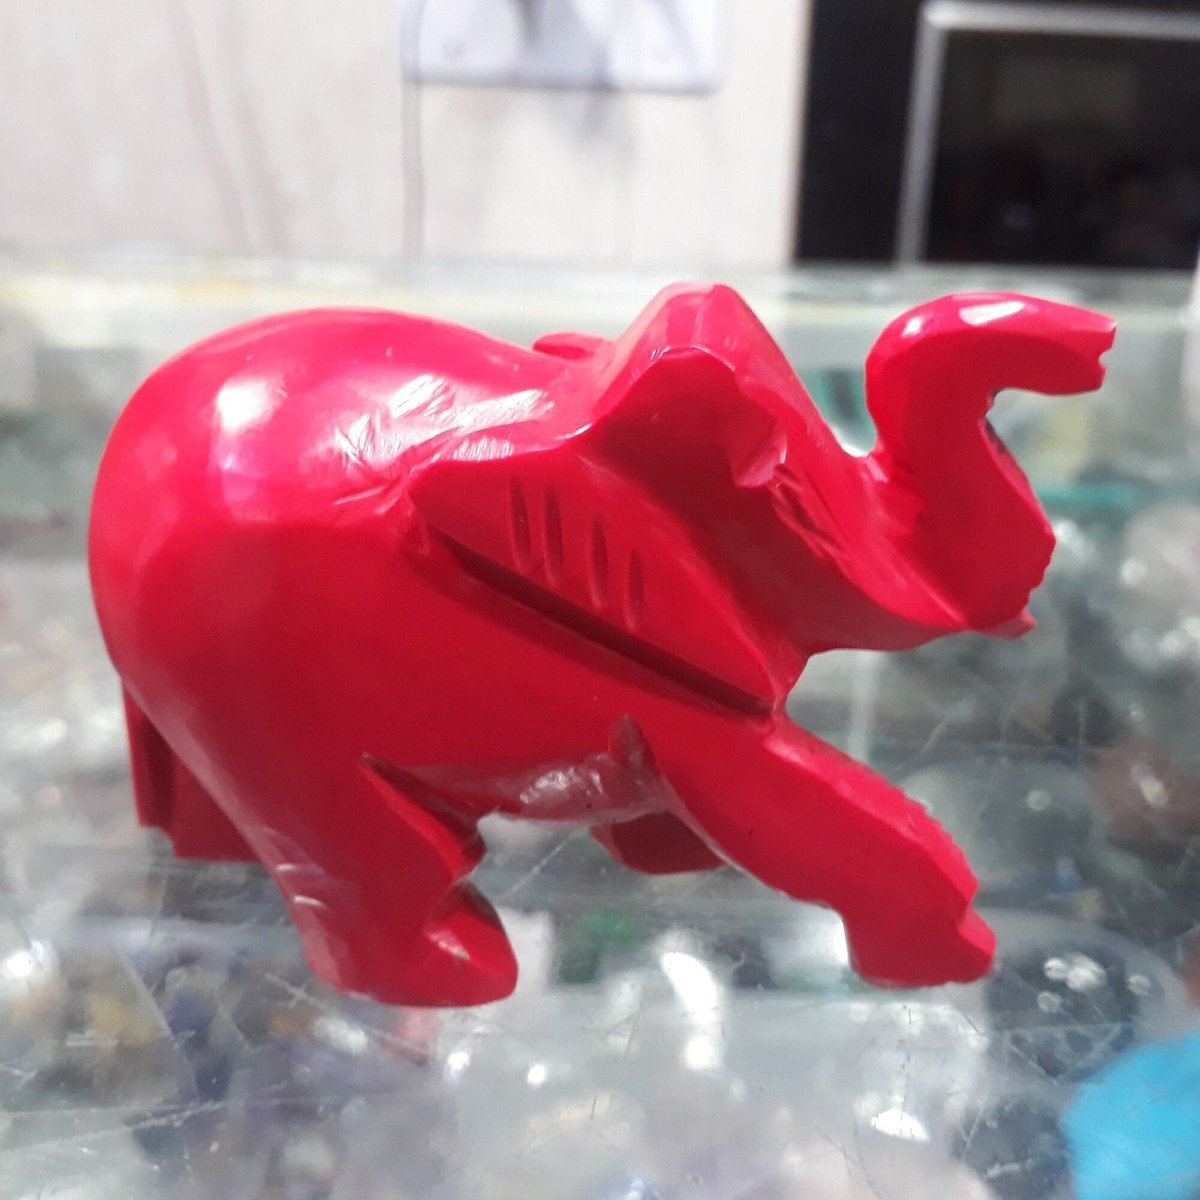 Christmas gift synthetic coral elephant ganesh hand carved figurine etsy.me/3mJ2HdB #red #engagement #christmas #syntheticcoral #coralelephant #elephantcharm #elephantjewellry #redelephant #giftforher